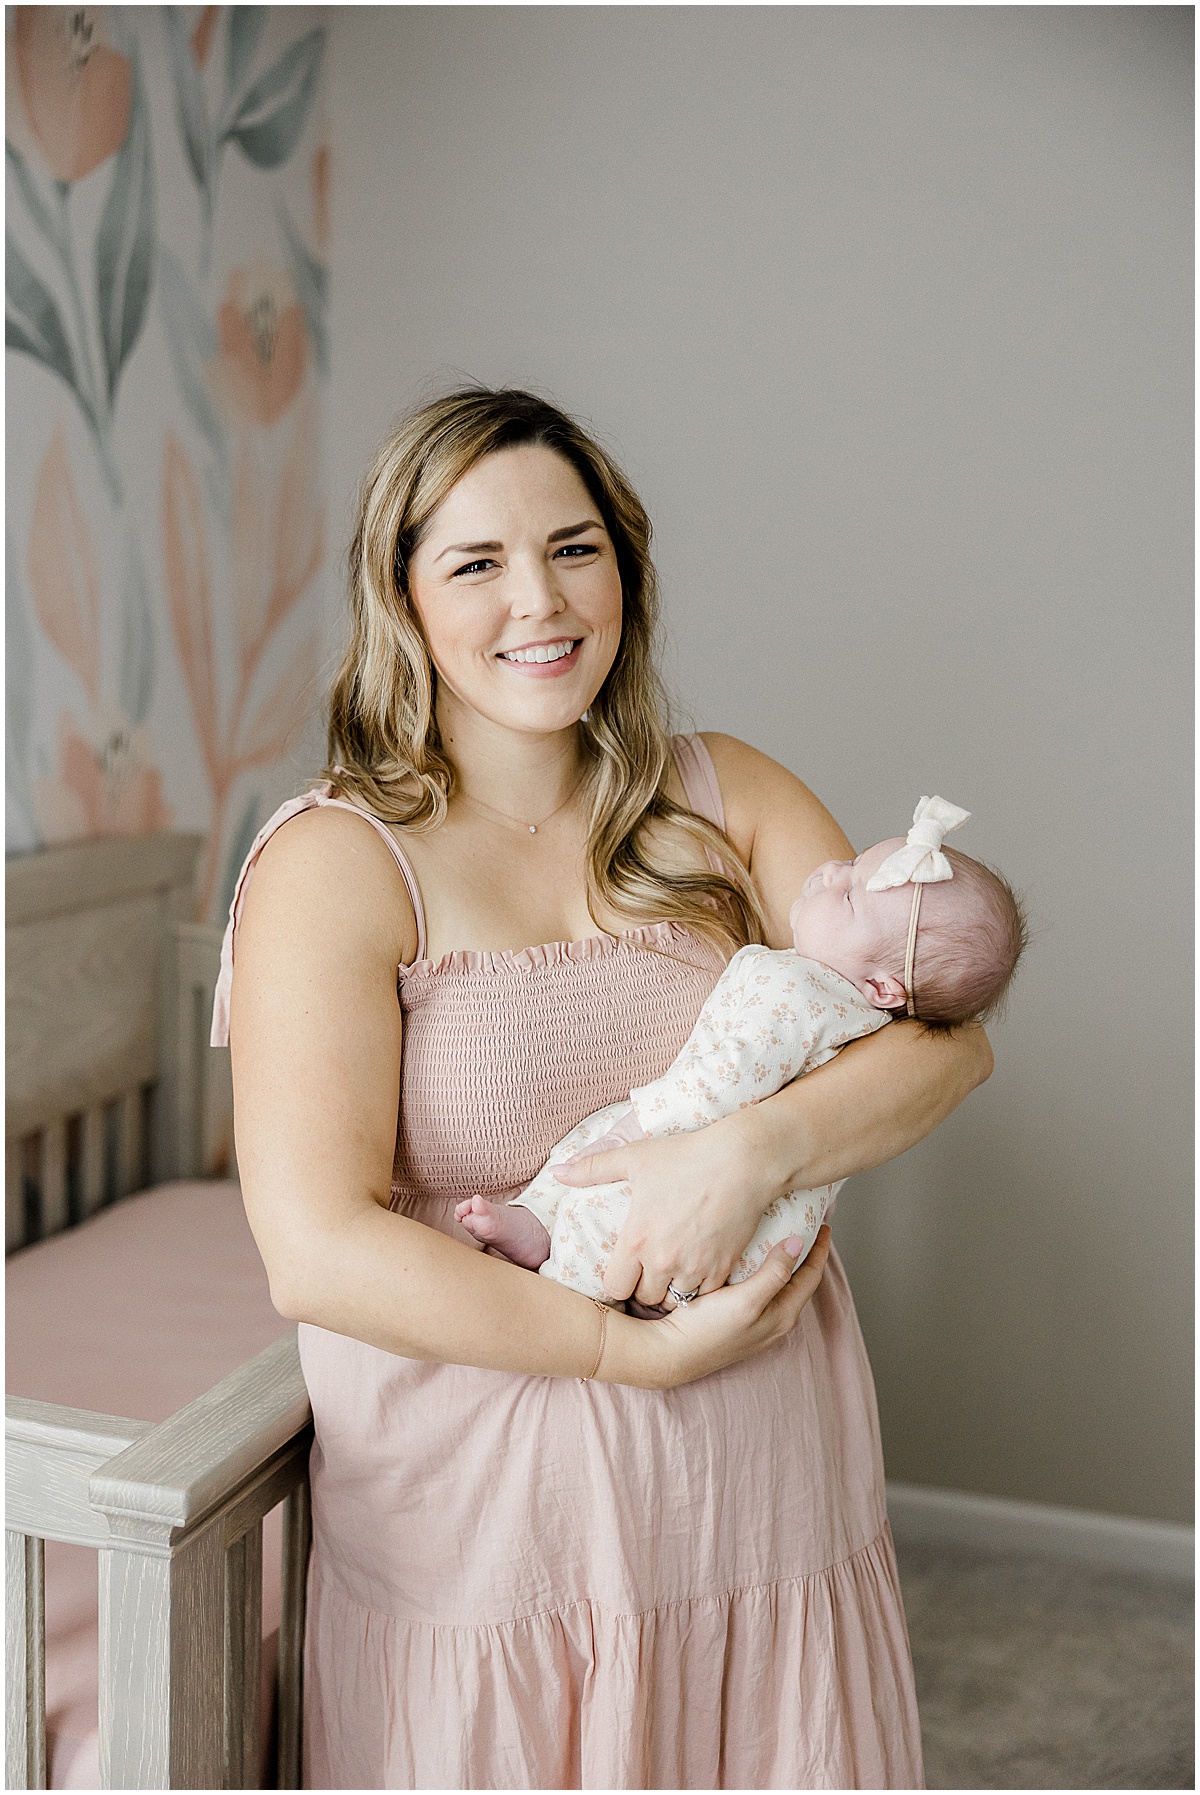 Baby Amelia’s had her newborn photography in Indianapolis, Indiana captured by Indianapolis Newborn Photographer, Kaitlin Mendoza Photography.